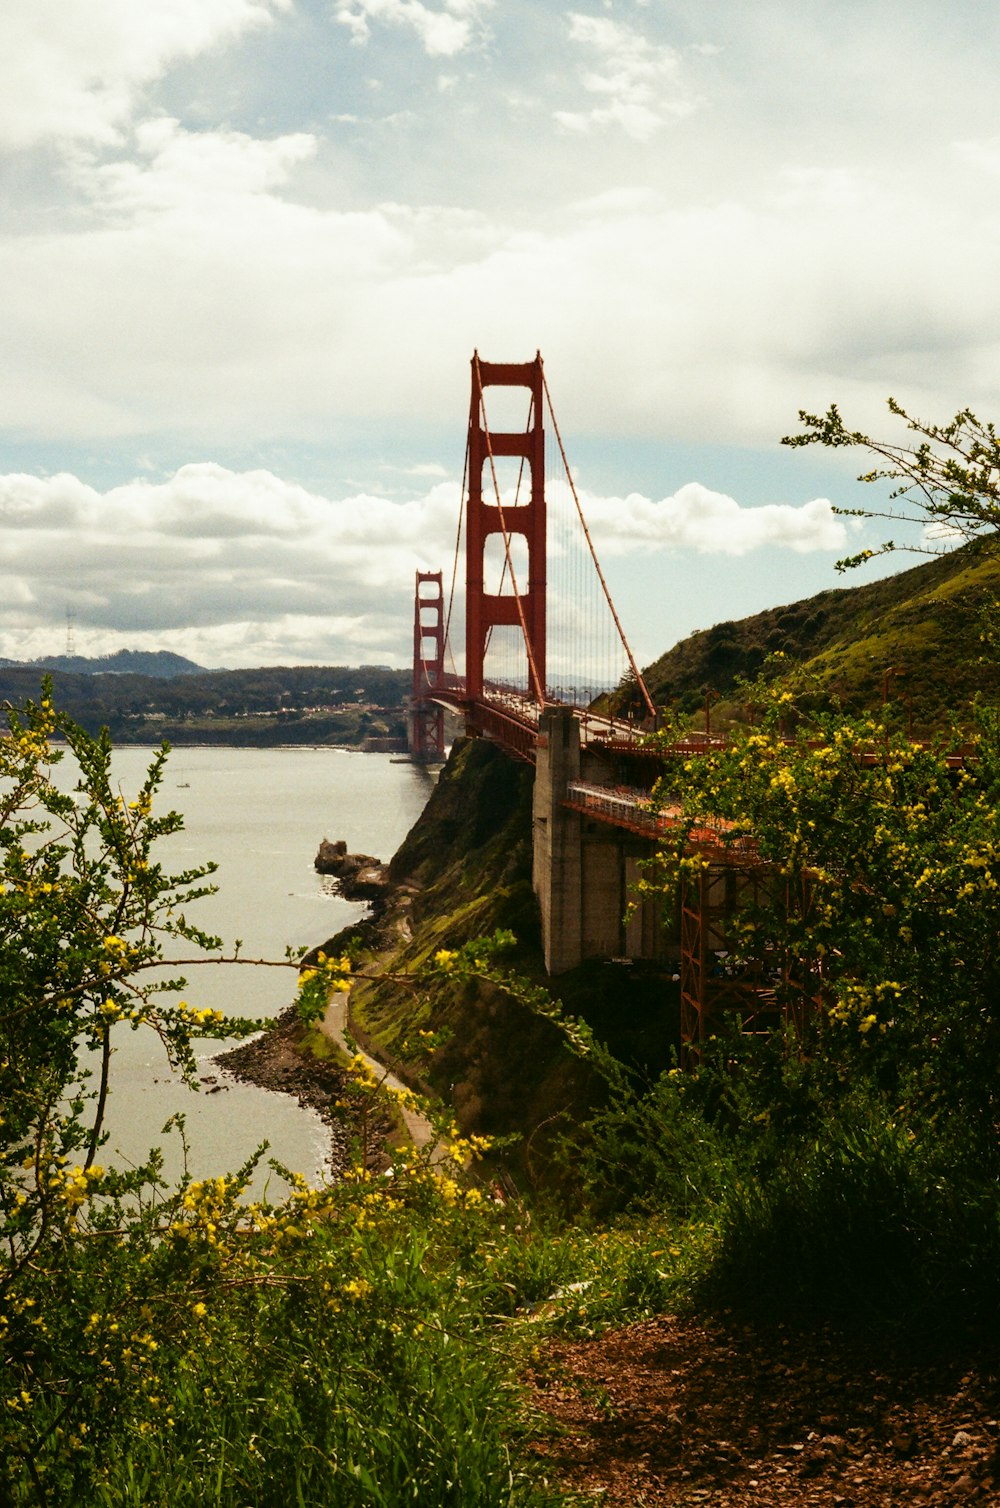 a view of the golden gate bridge from the side of a hill